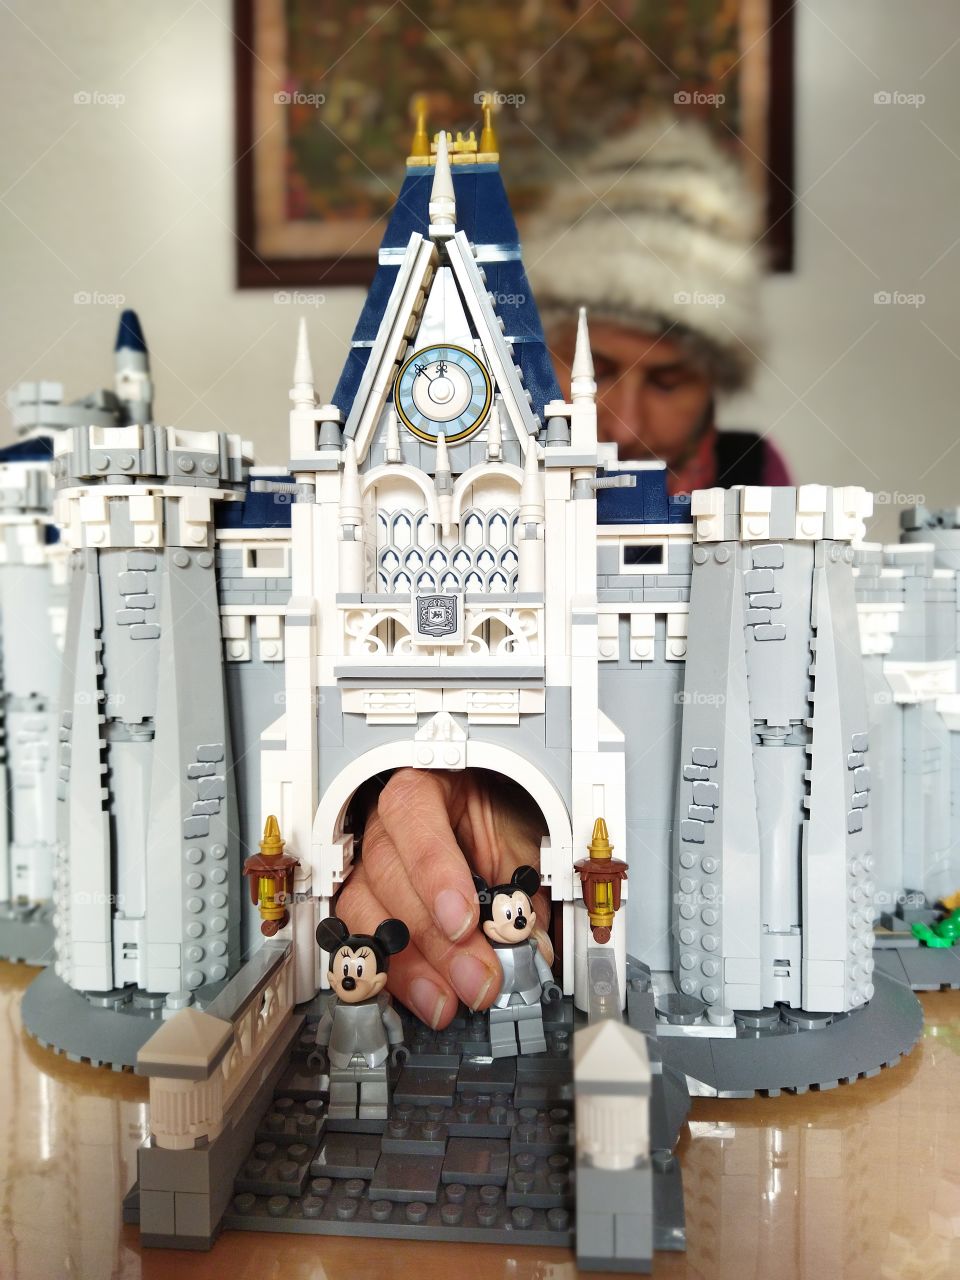 Lego castle with Knight Mickey and Minnie mouse image of woman building Lego and placing figurines